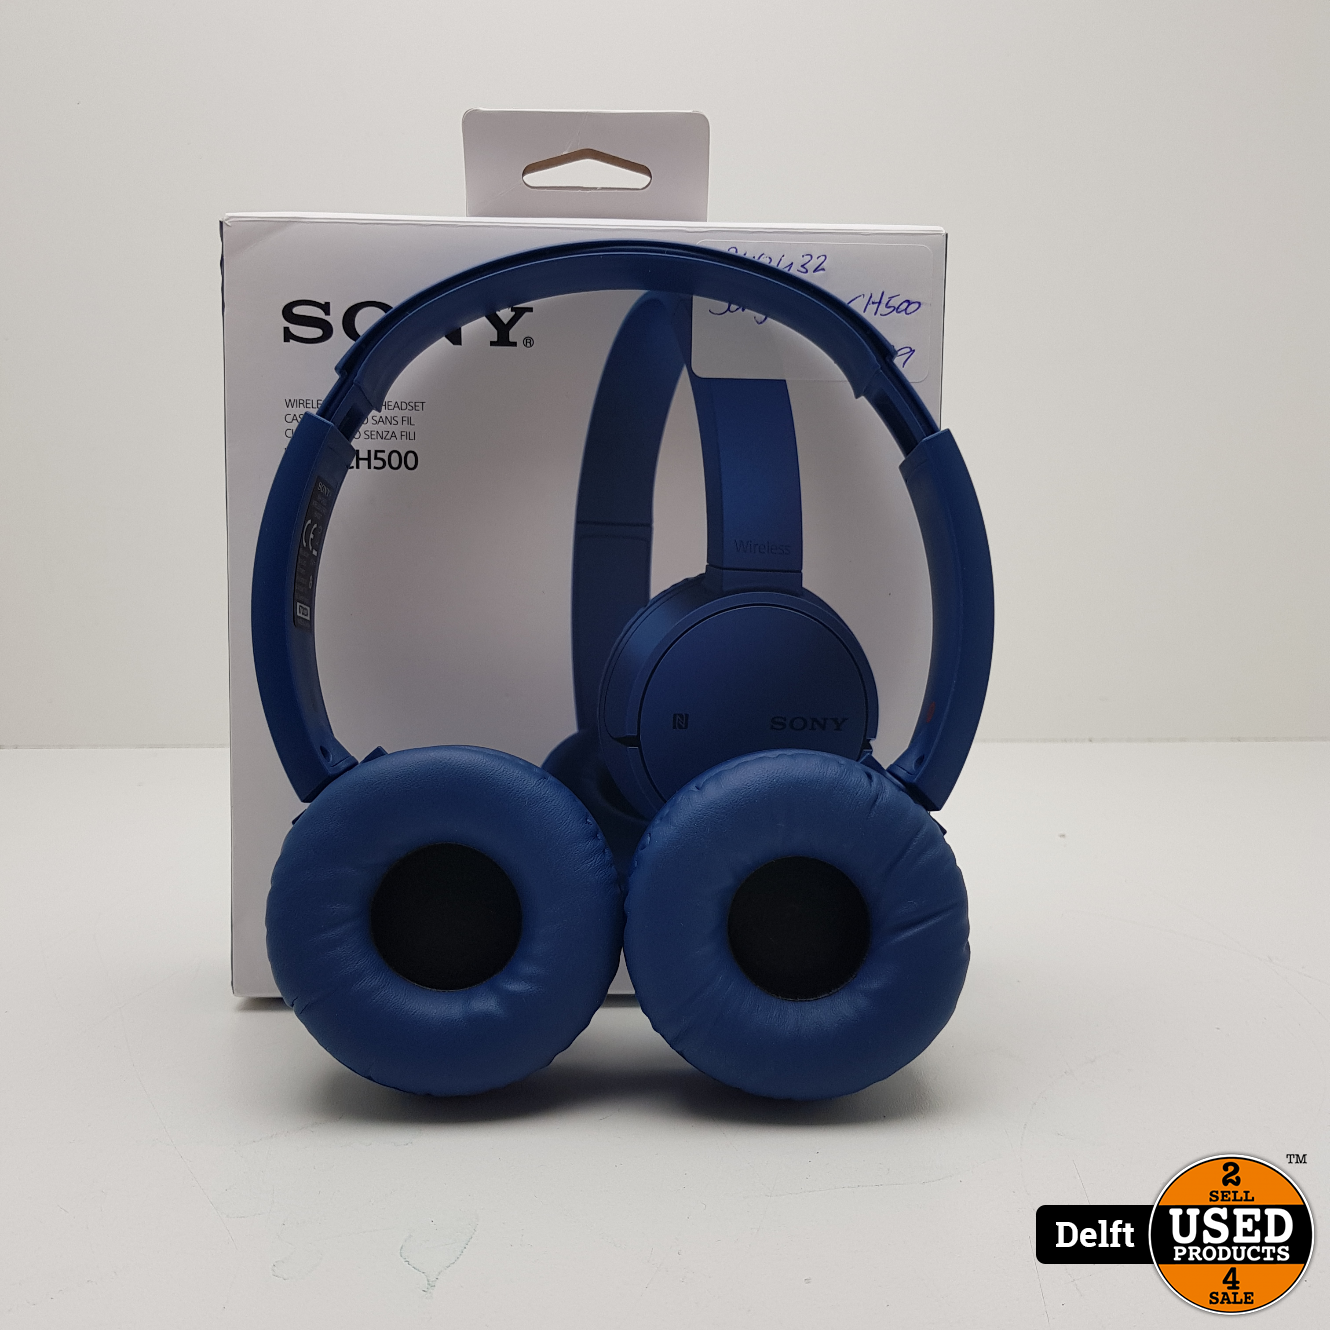 forum Ale Moeras Sony WH-CH500 Wireless Bluetooth headset nette staat garantie - Used  Products Delft